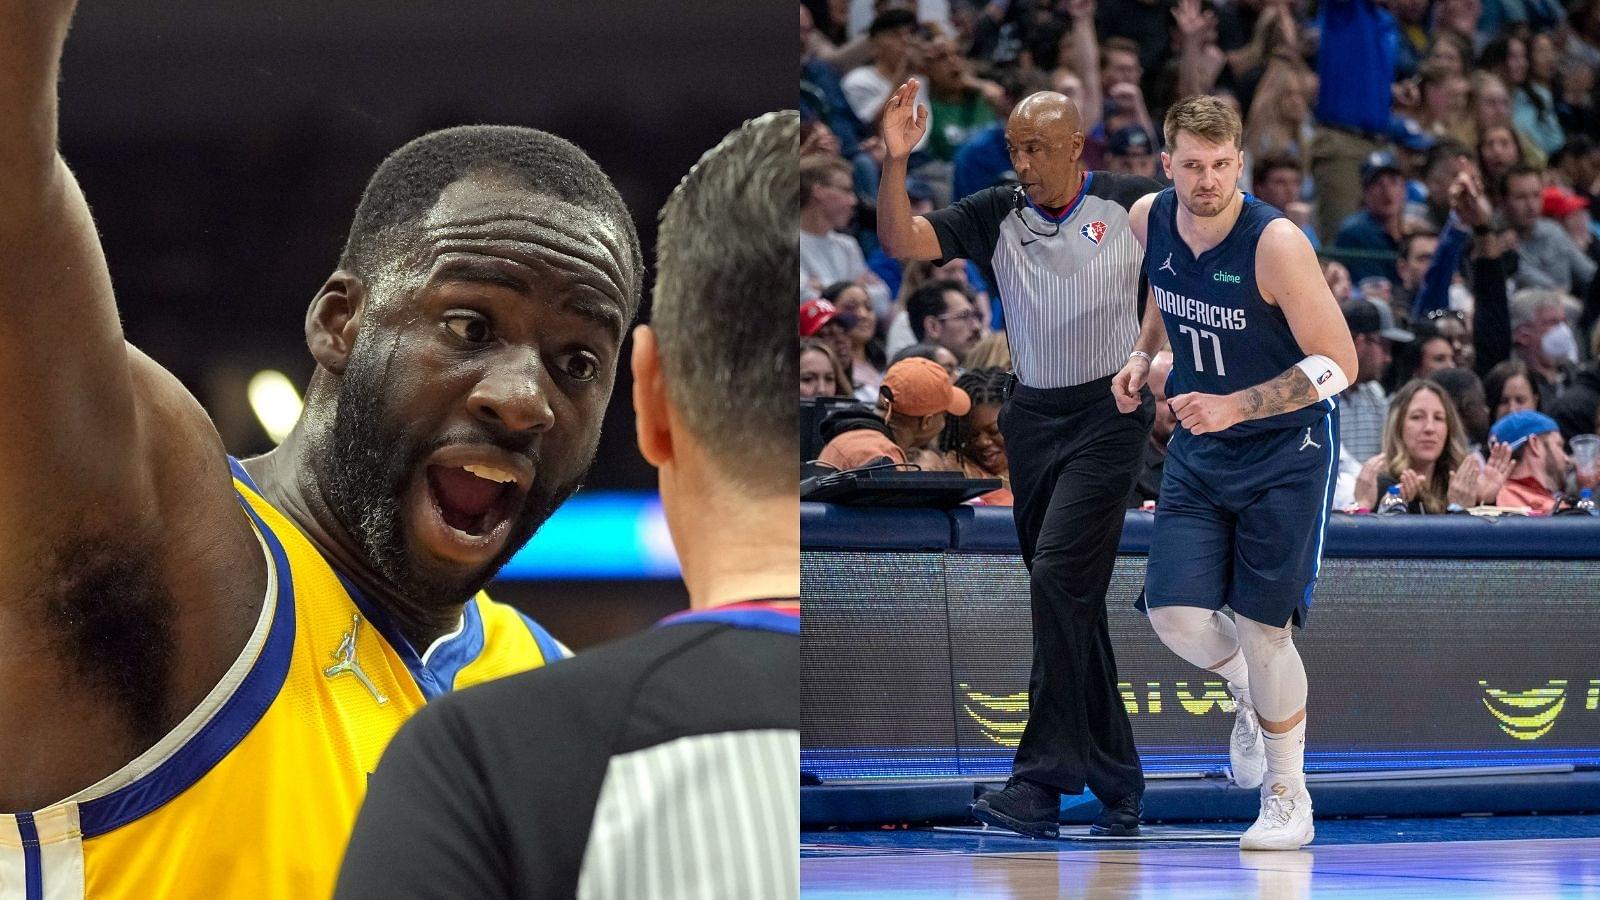 "Luka Doncic's Tech rescinded for no cursing!? I’ll finally win some appeals": Draymond Green is optimistic about his Technical Foul troubles in future